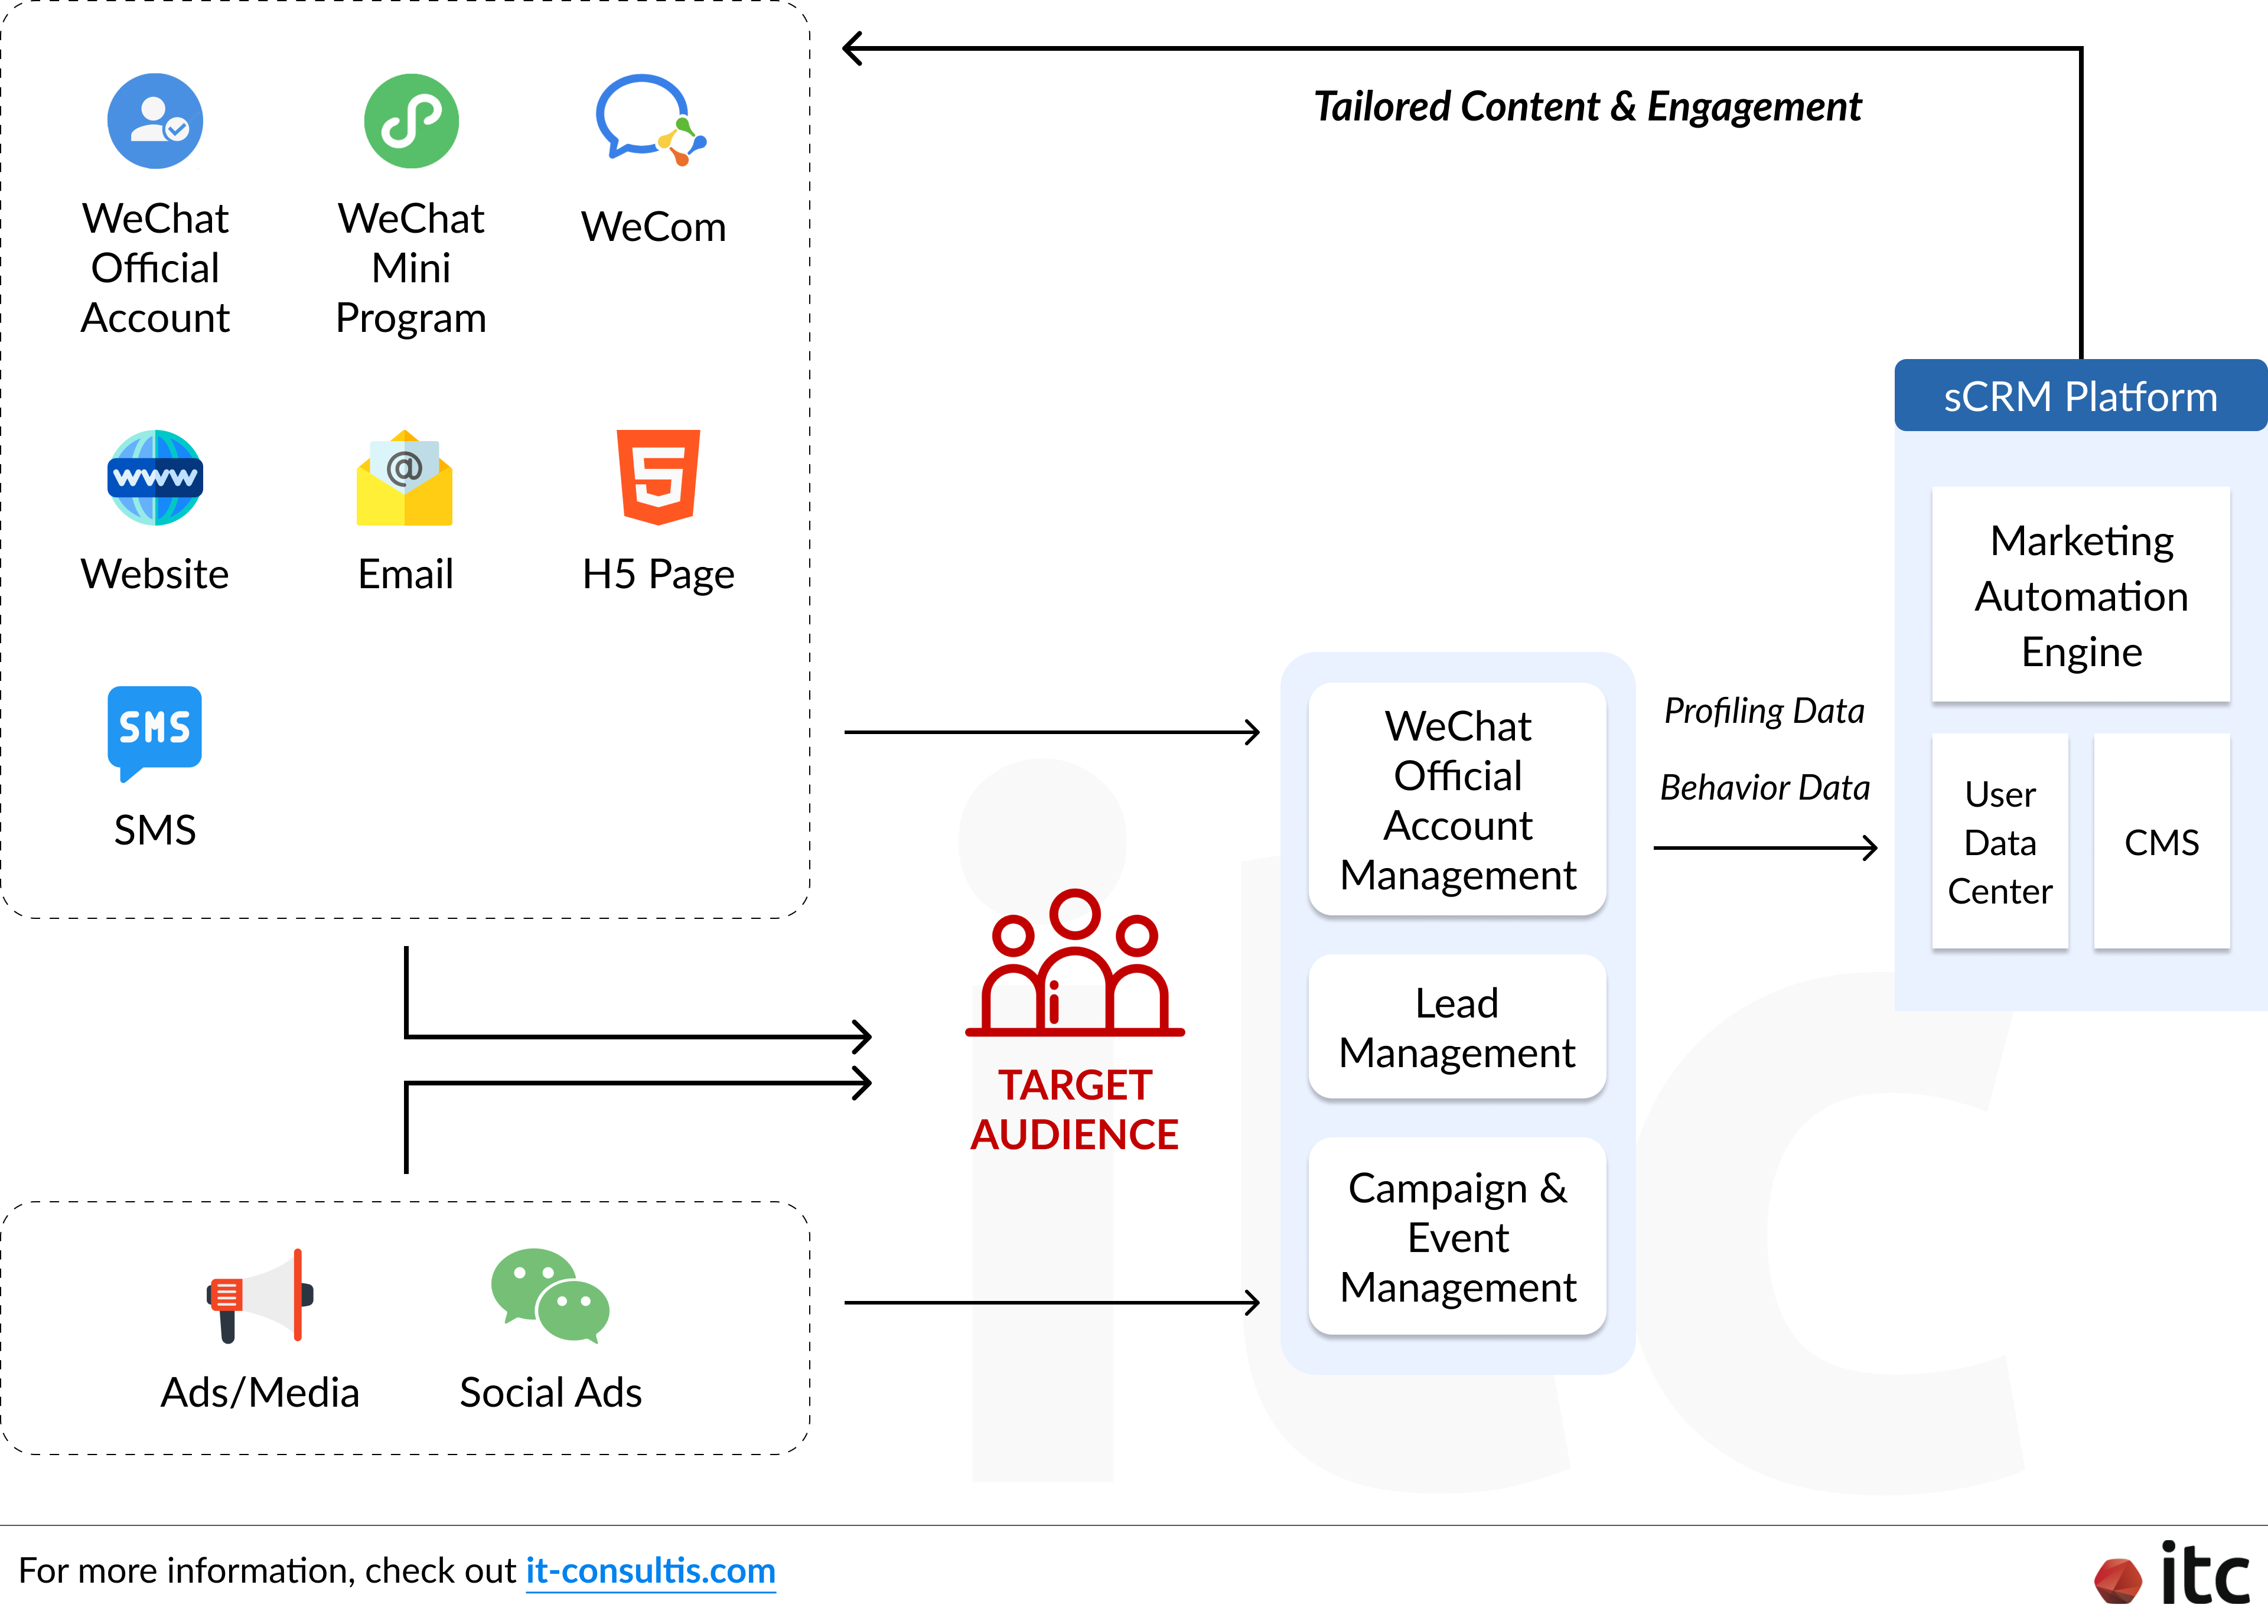 Overview of how Marketing Automation and Social CRM (sCRM) system helps ensure direct data capture, build holistic user profiles, deliver tailored content to the target audience, and drive an omnichannel journey